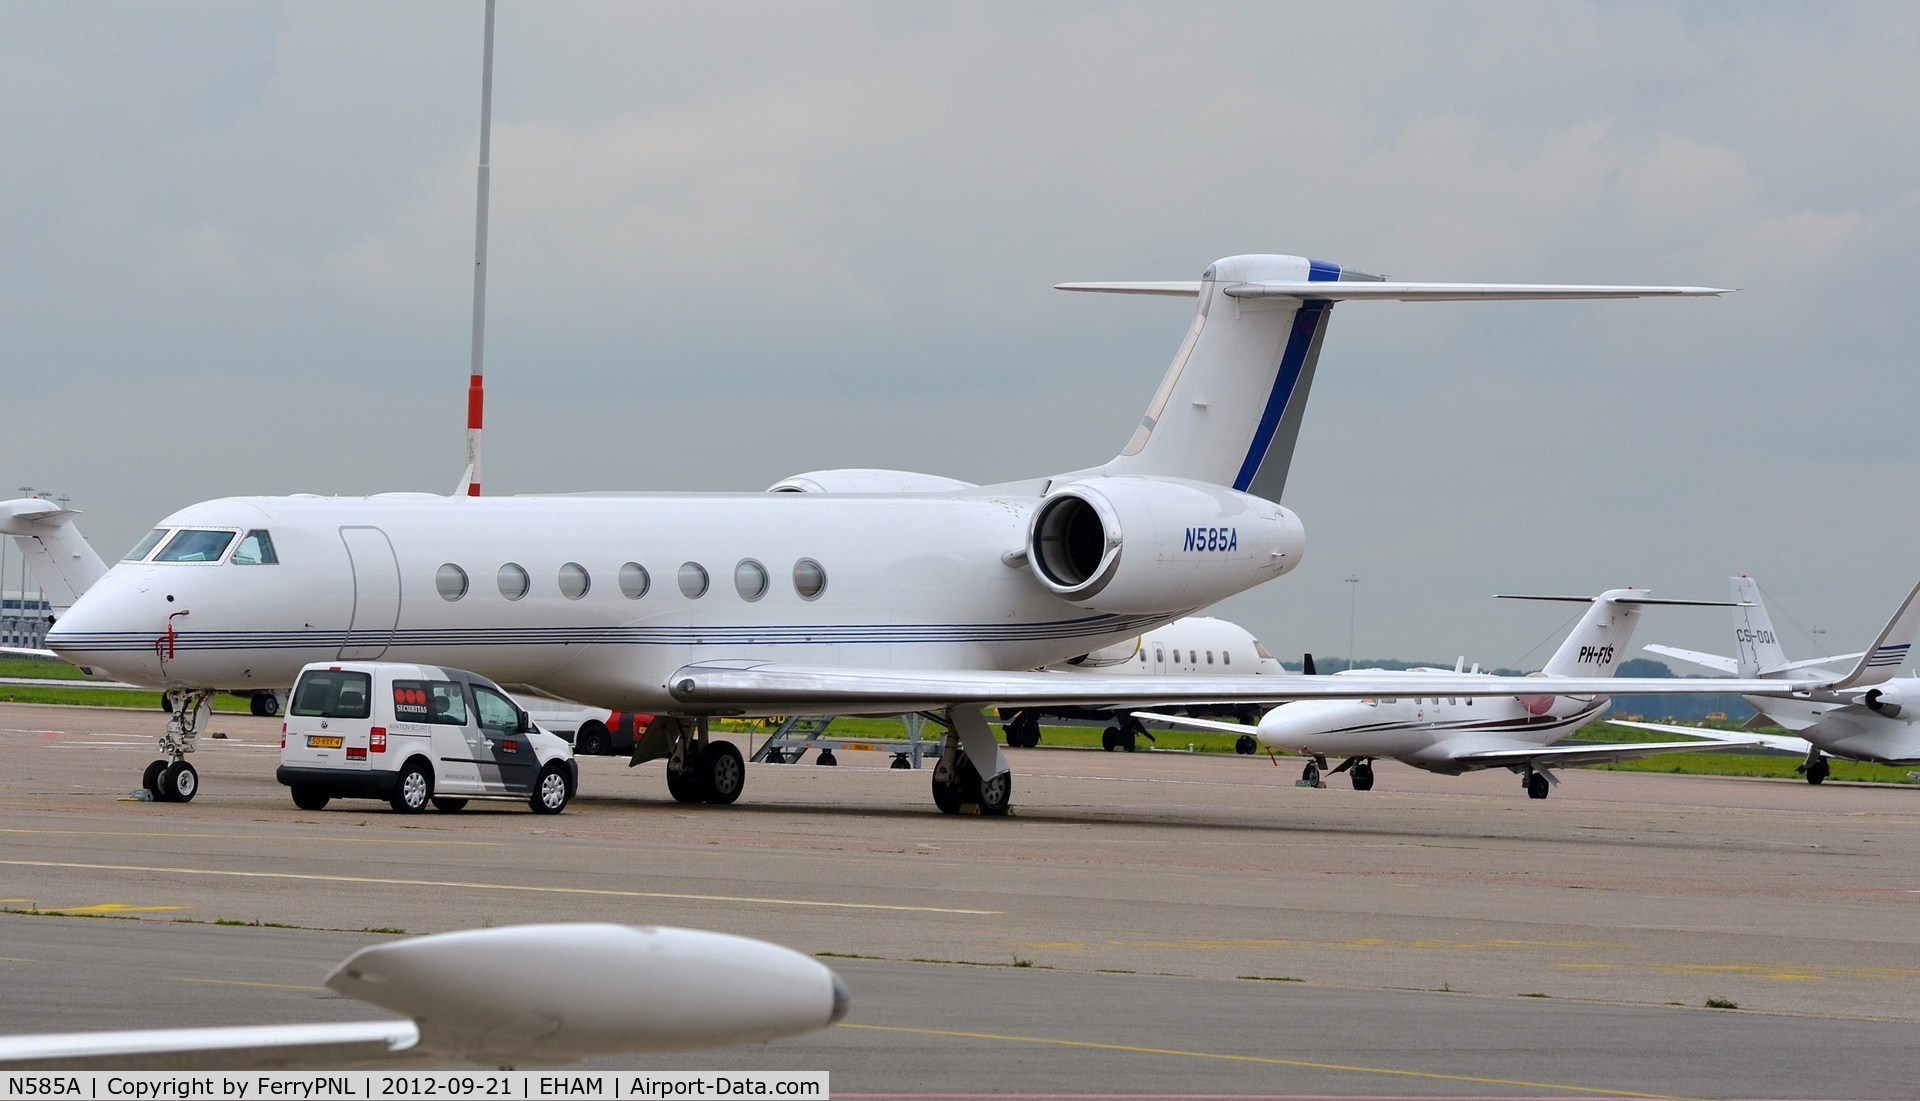 N585A, 2006 Gulfstream Aerospace GV-SP (G550) C/N 5110, Aramco's G5 securely parked at AMS-east apron.